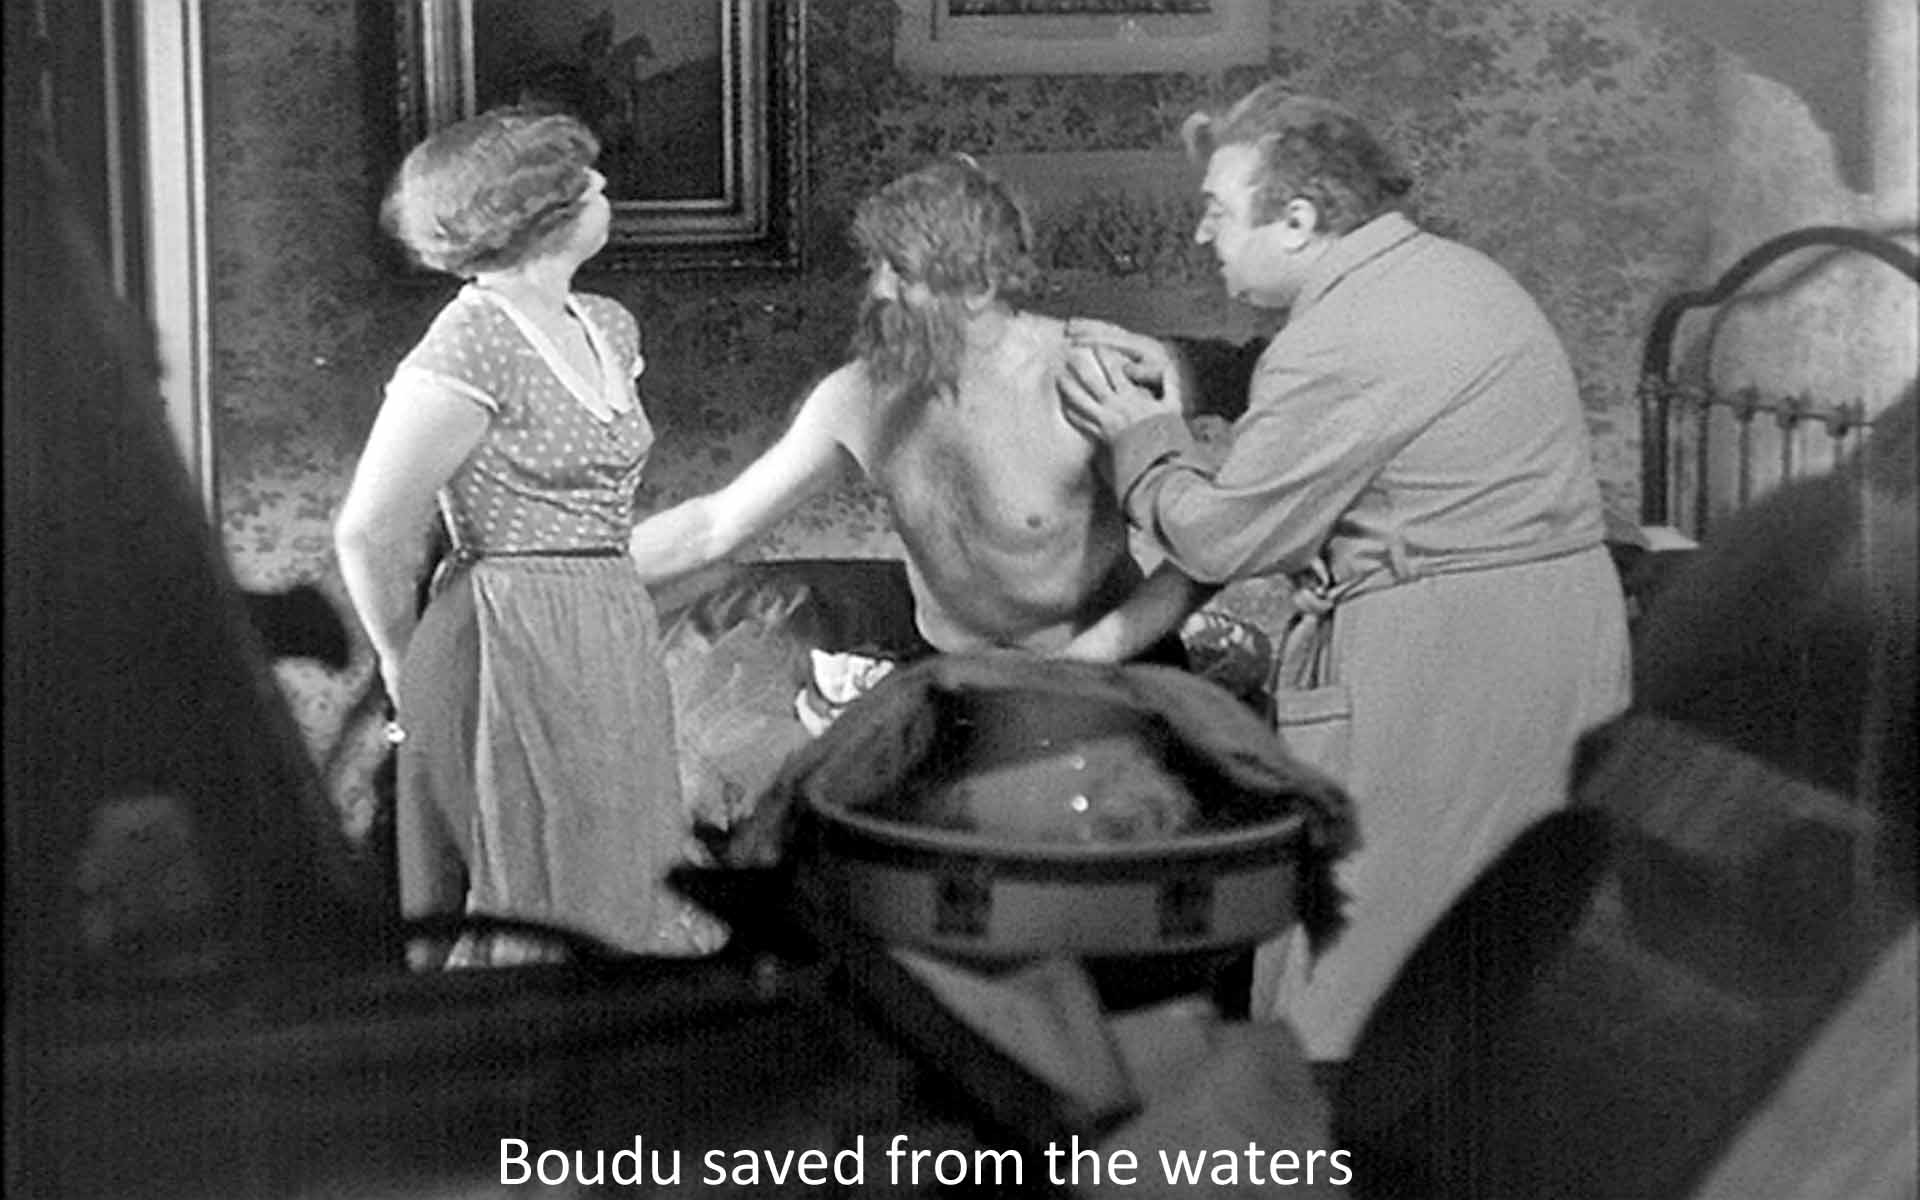 Boudu saved from the waters